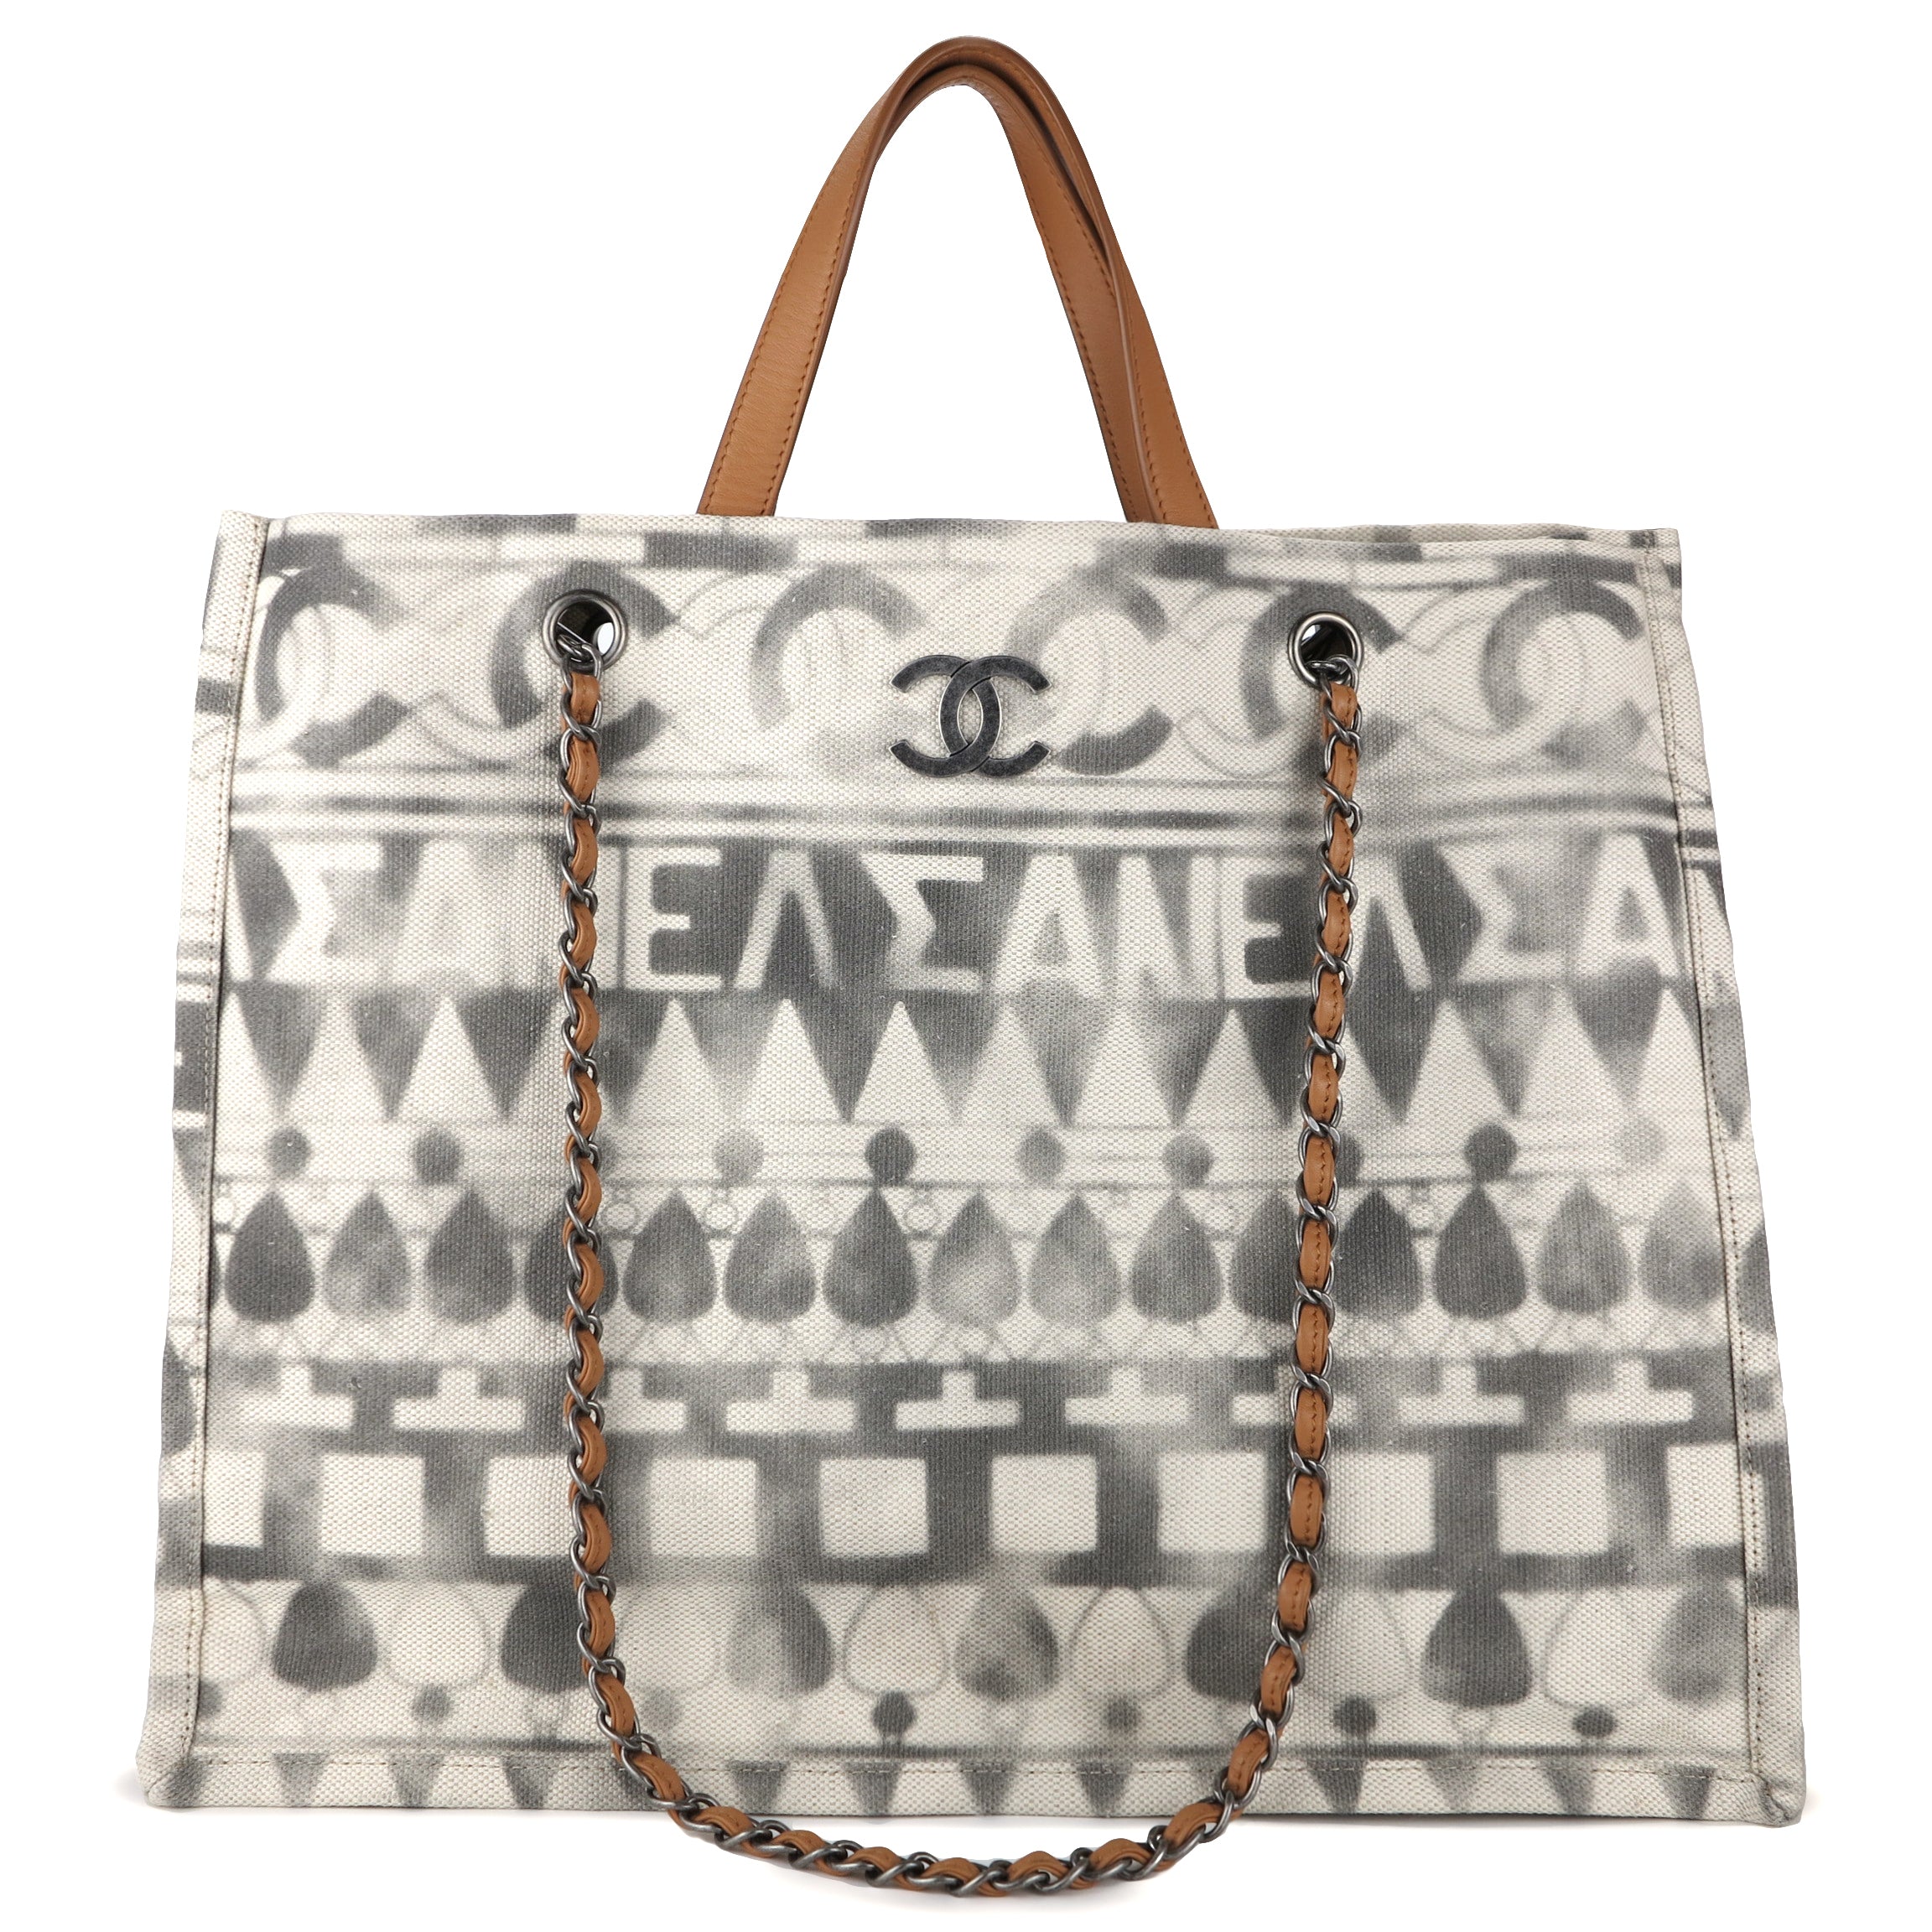 Chanel Canvas Deauville Large Tote Light Blue – Coco Approved Studio